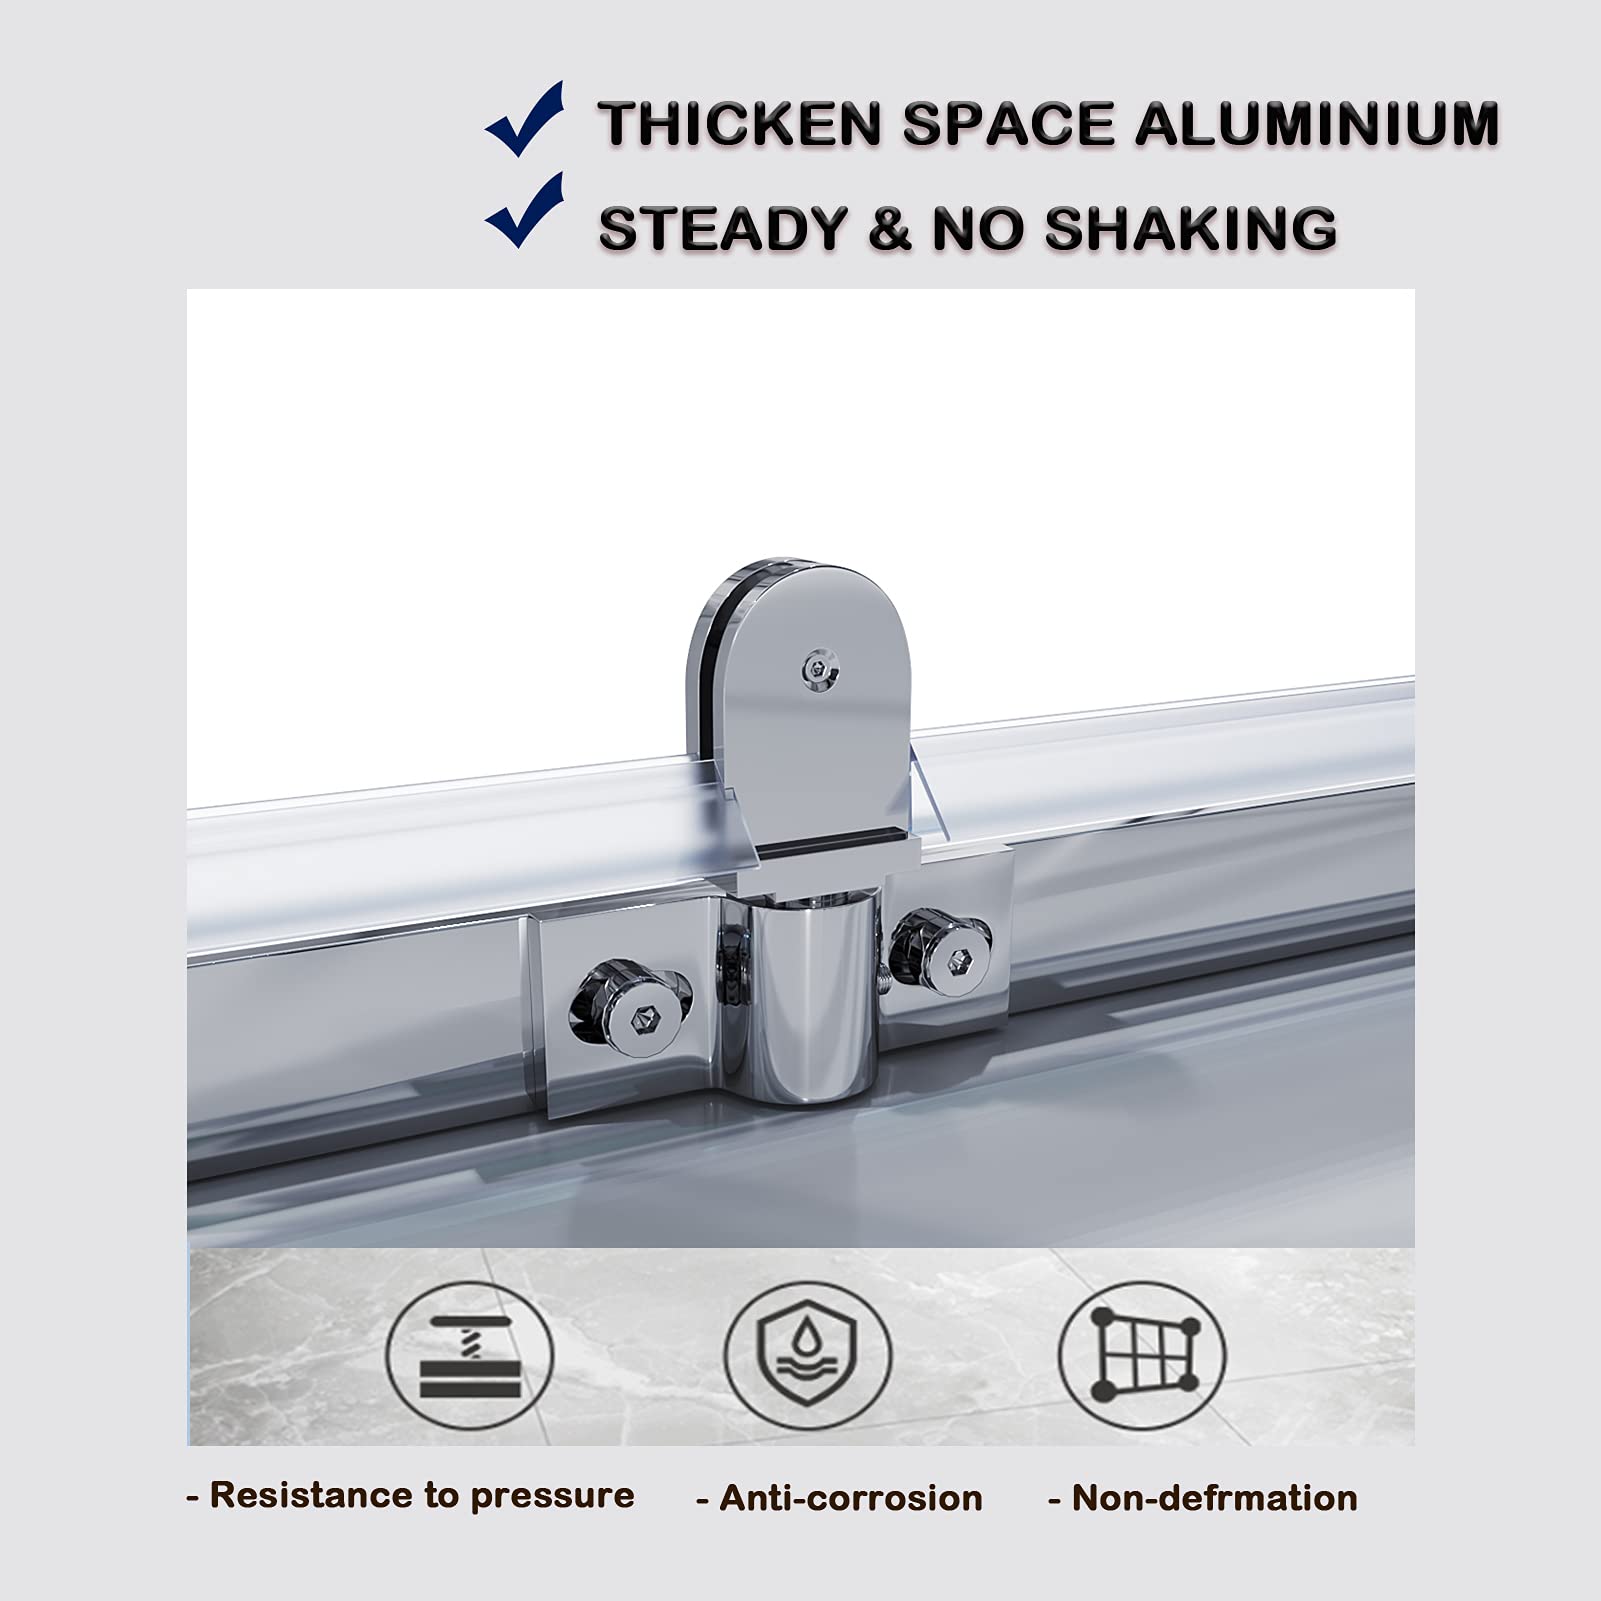 （thicken space aluminum）（steady & no shaking）